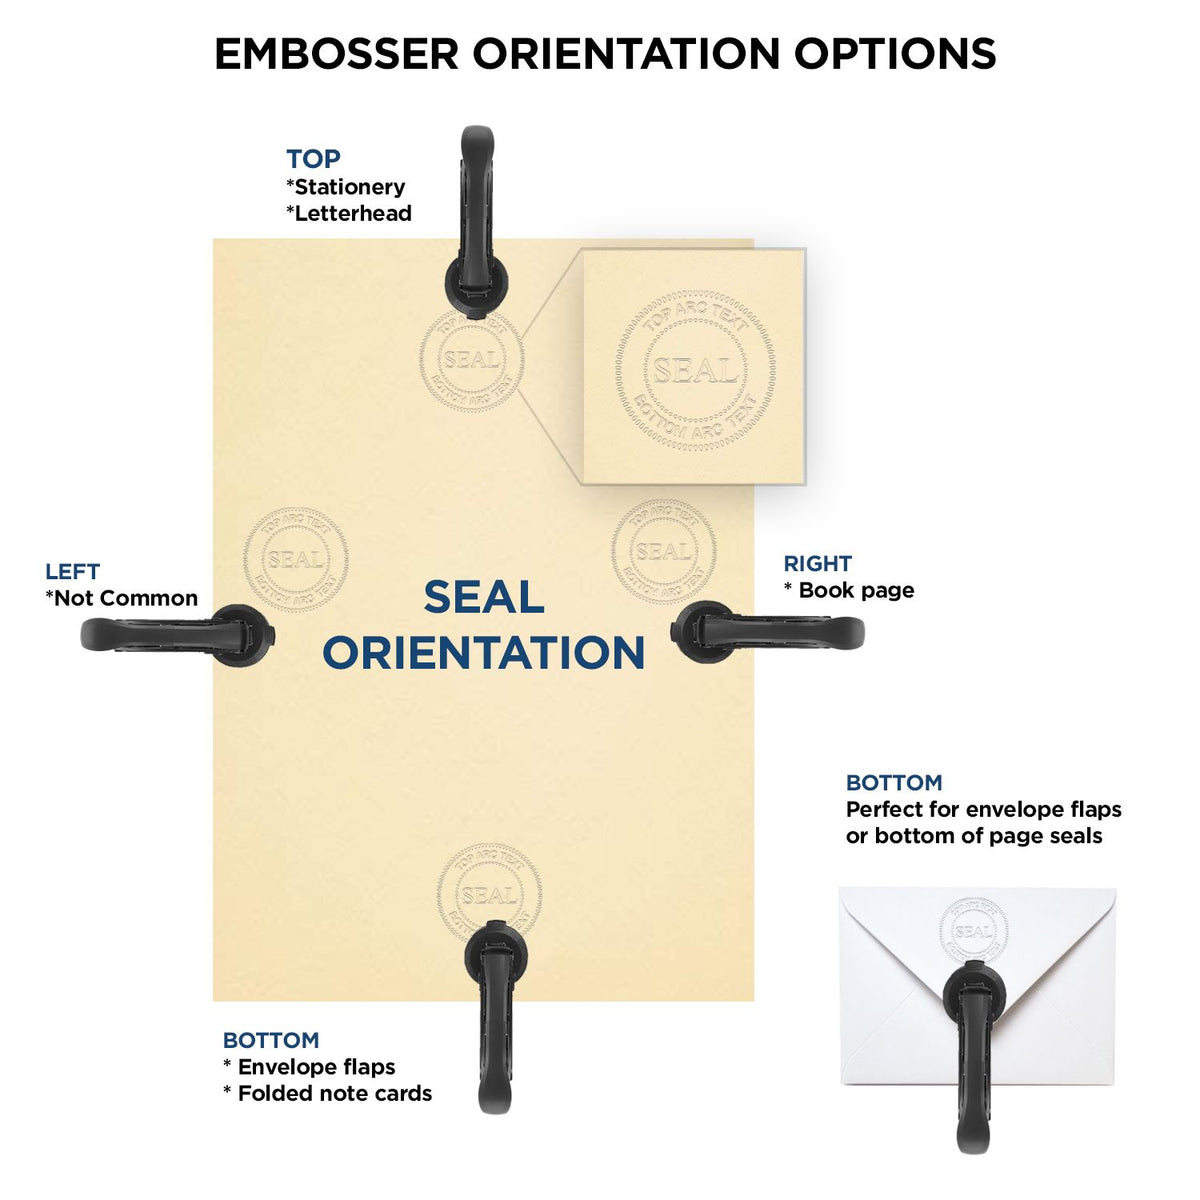 An infographic for the Heavy Duty Cast Iron Iowa Land Surveyor Seal Embosser showing embosser orientation, this is showing examples of a top, bottom, right and left insert.